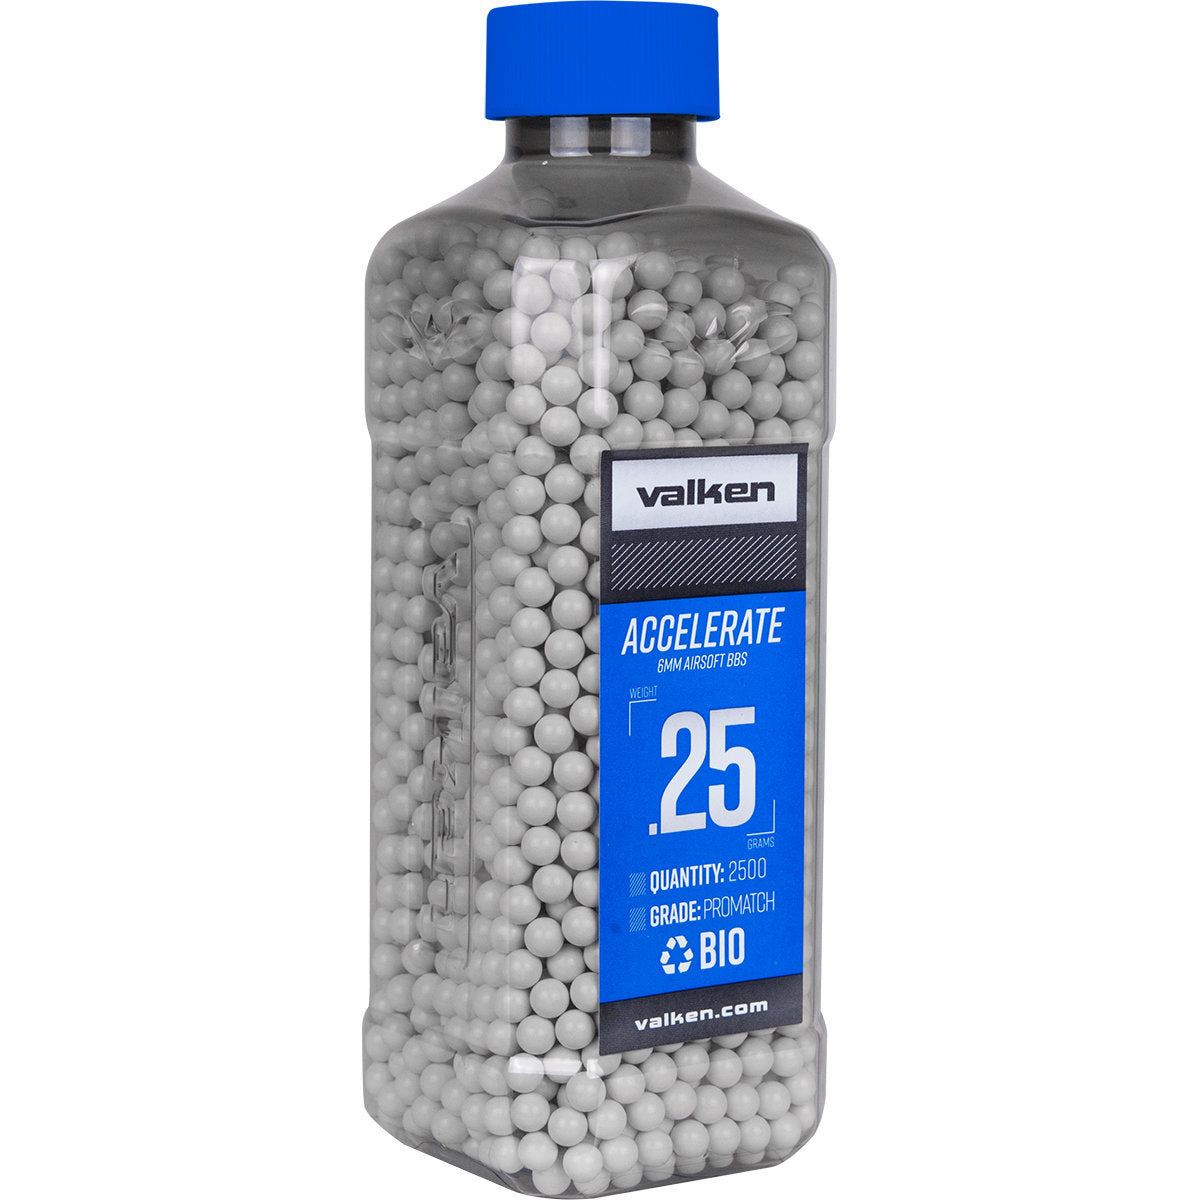 Valken Accelerate Promatch 0.25G 2,500Ct Biodegradable Airsoft Bbs